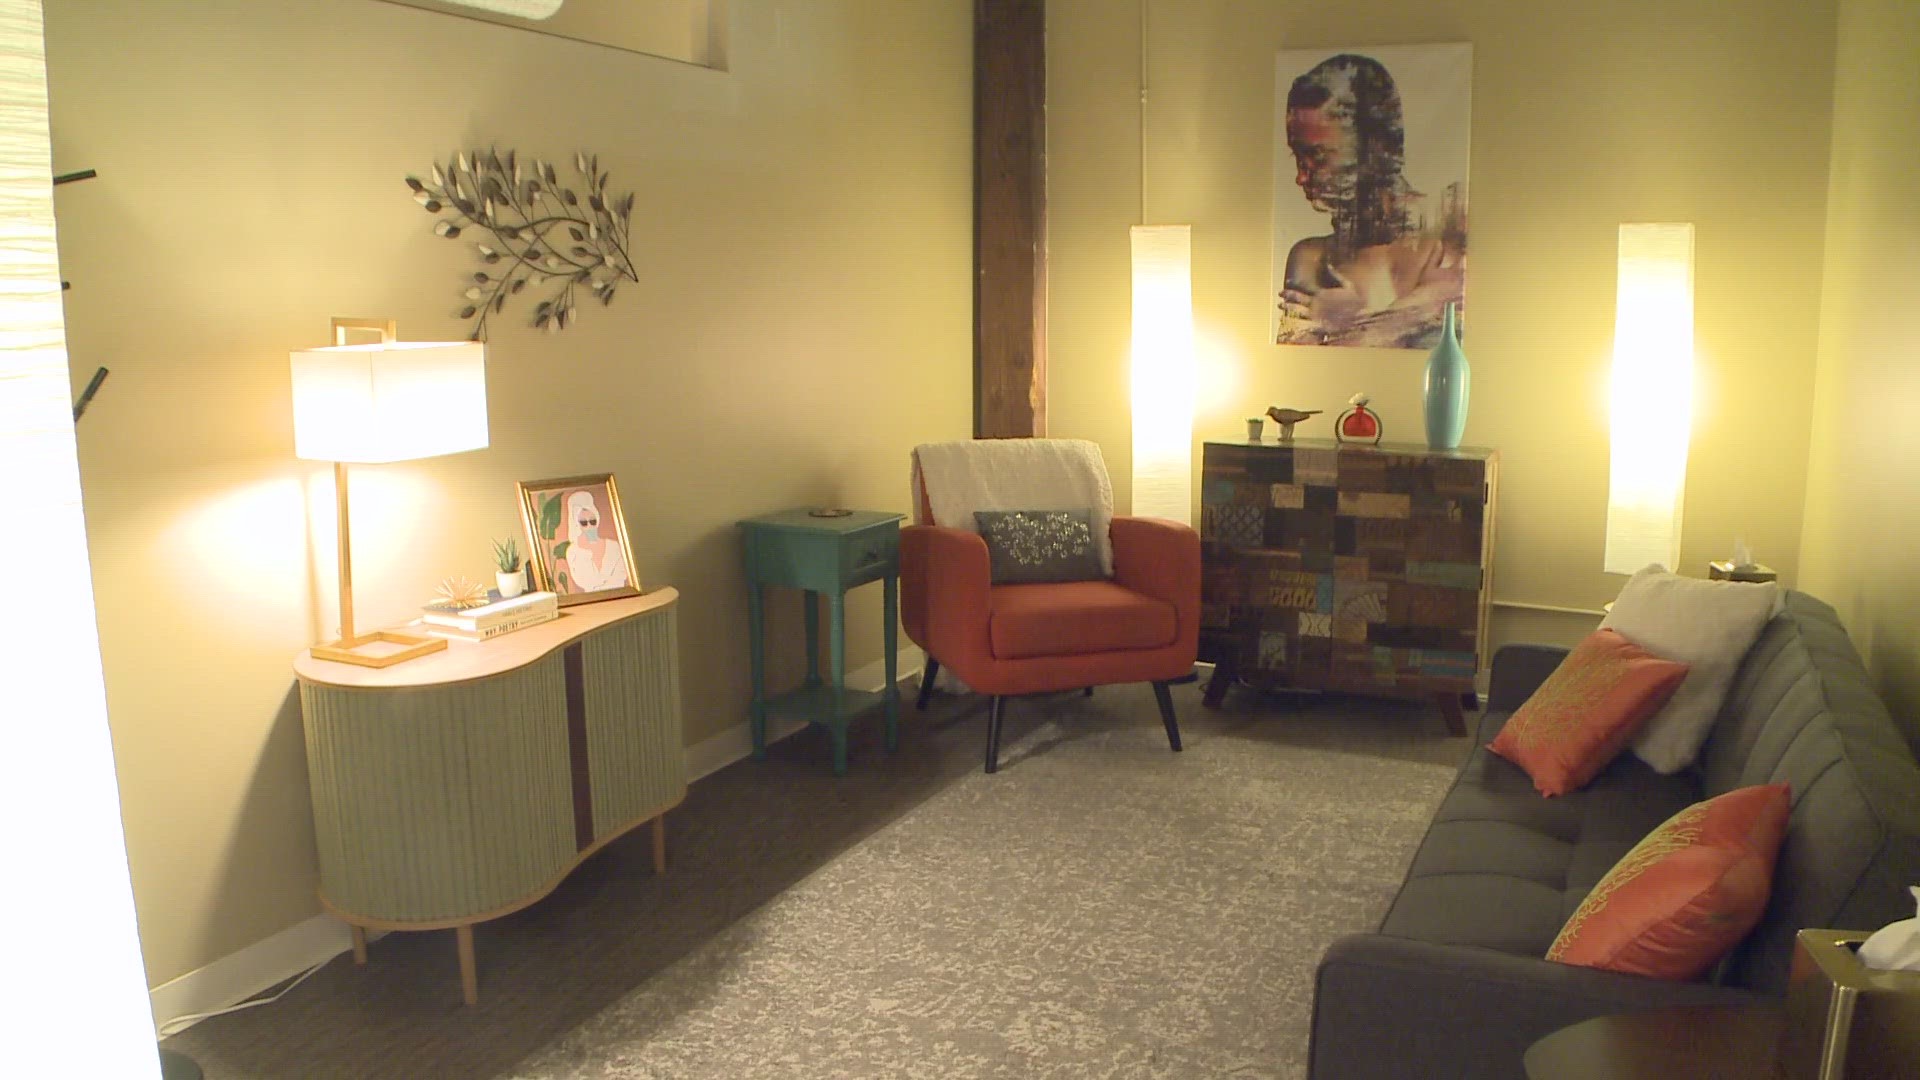 The Colorado Women's Center is filled with comfort and inspiration. CEO Kendra Miguez says the journey starts with building connections and setting goals.